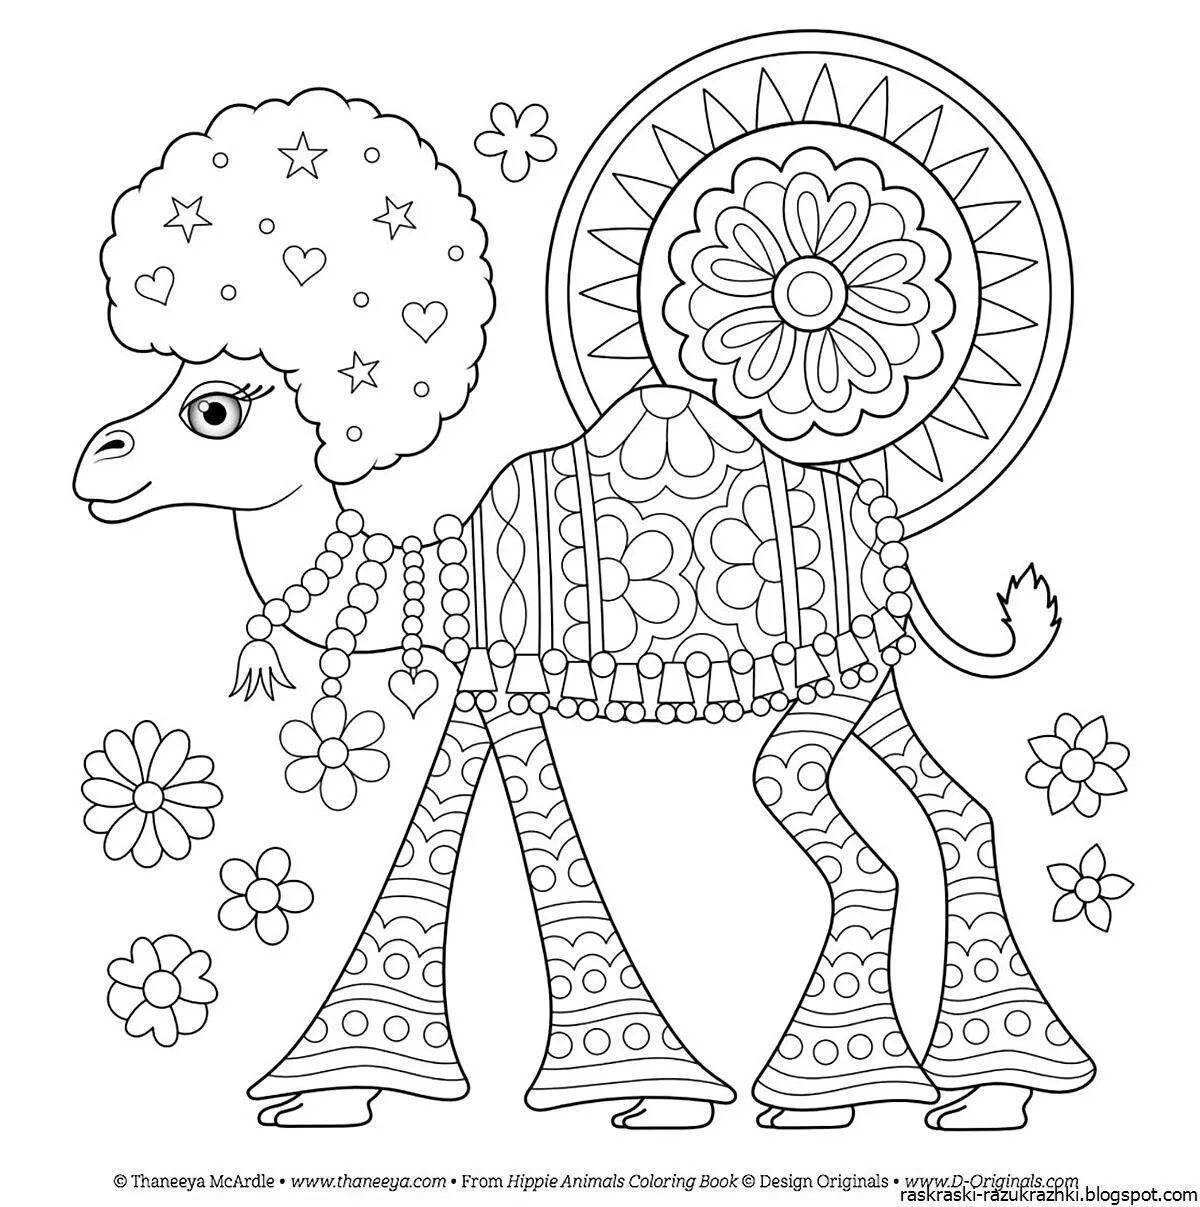 Creative coloring book for 10 year olds